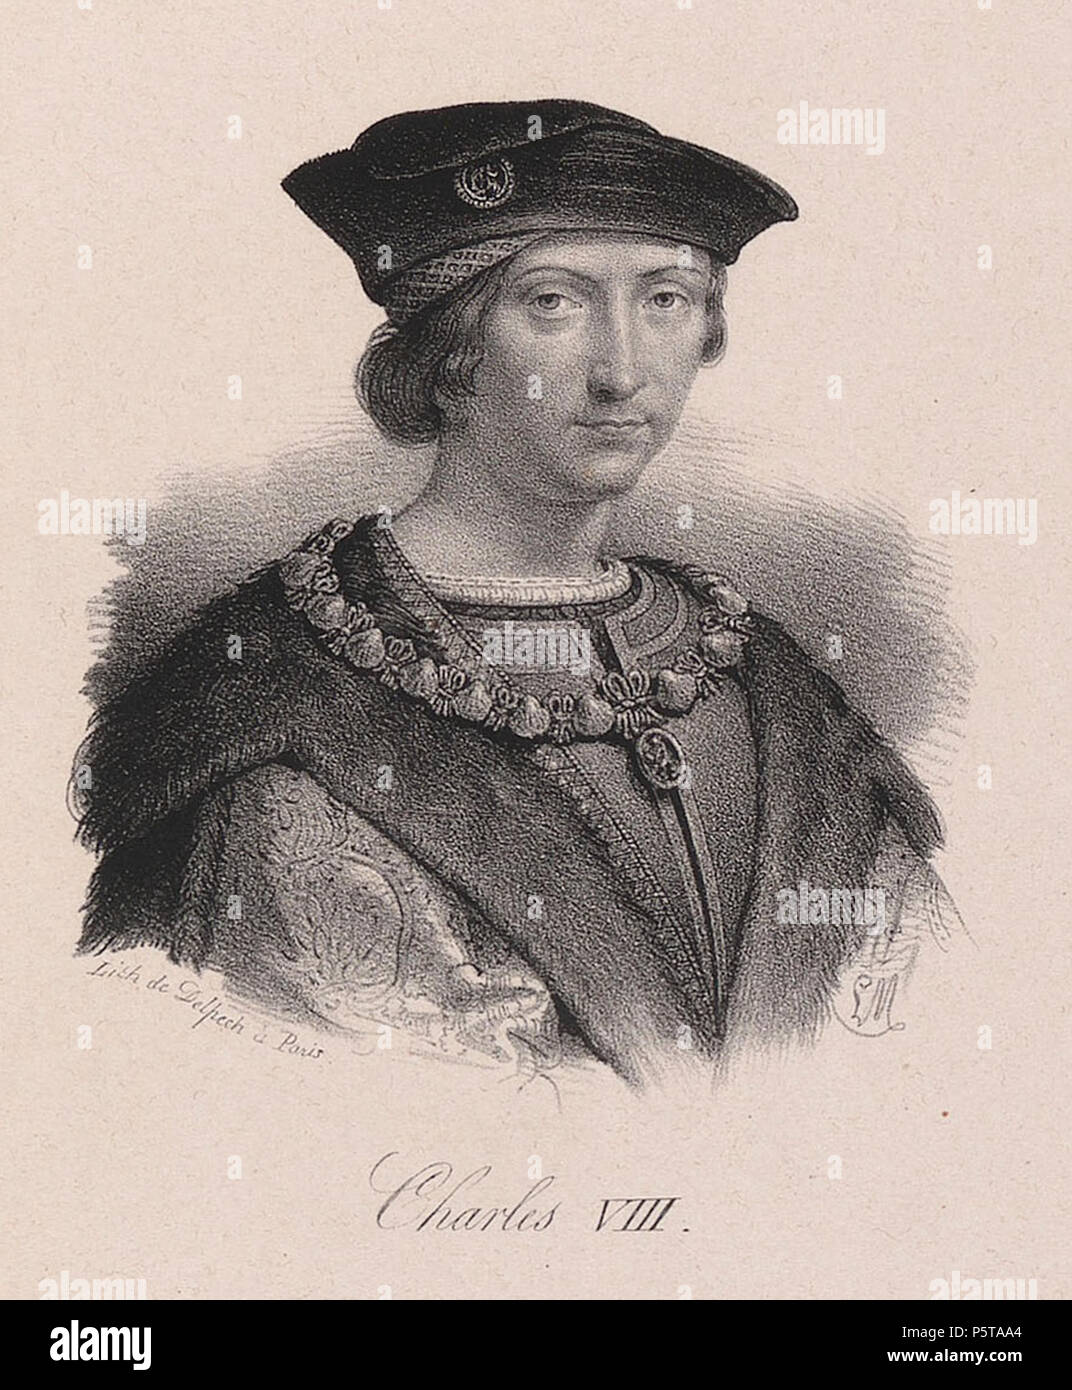 N/A.  English: Charles VIII of France (1470-1498) . 19th century. N/A 434 Delpech - Charles VIII of France Stock Photo